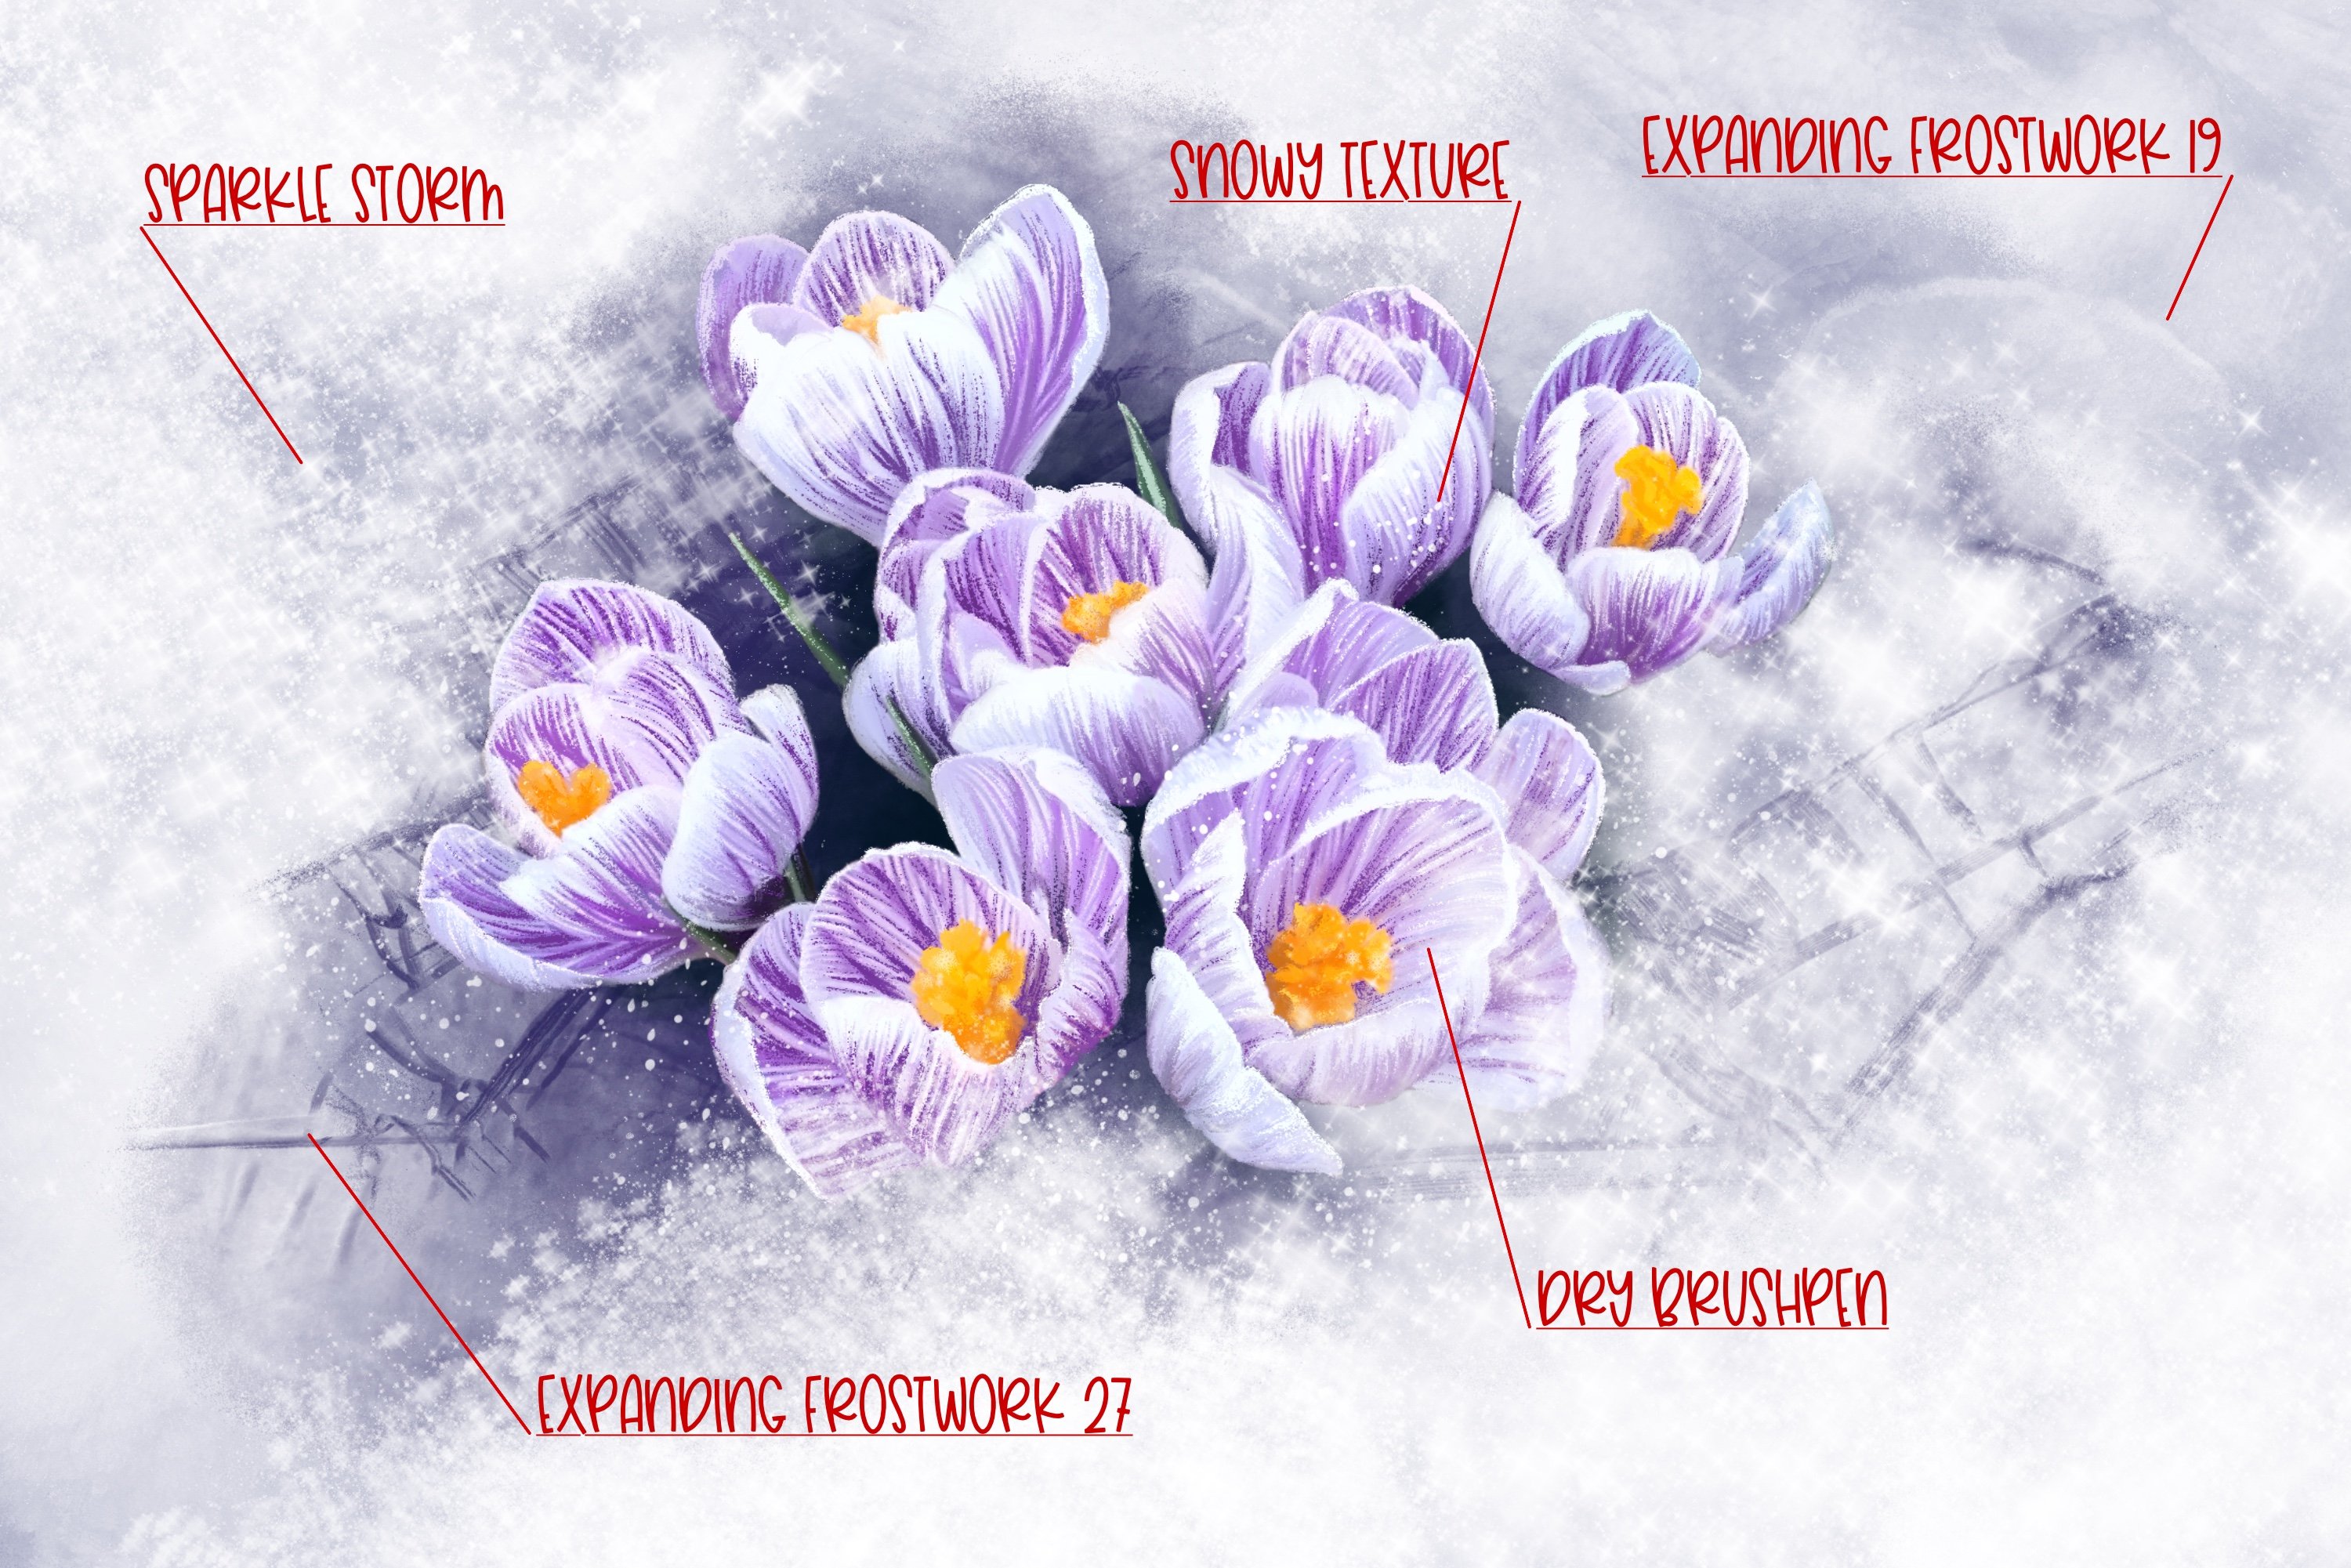 Snowy flowers made with brushes.